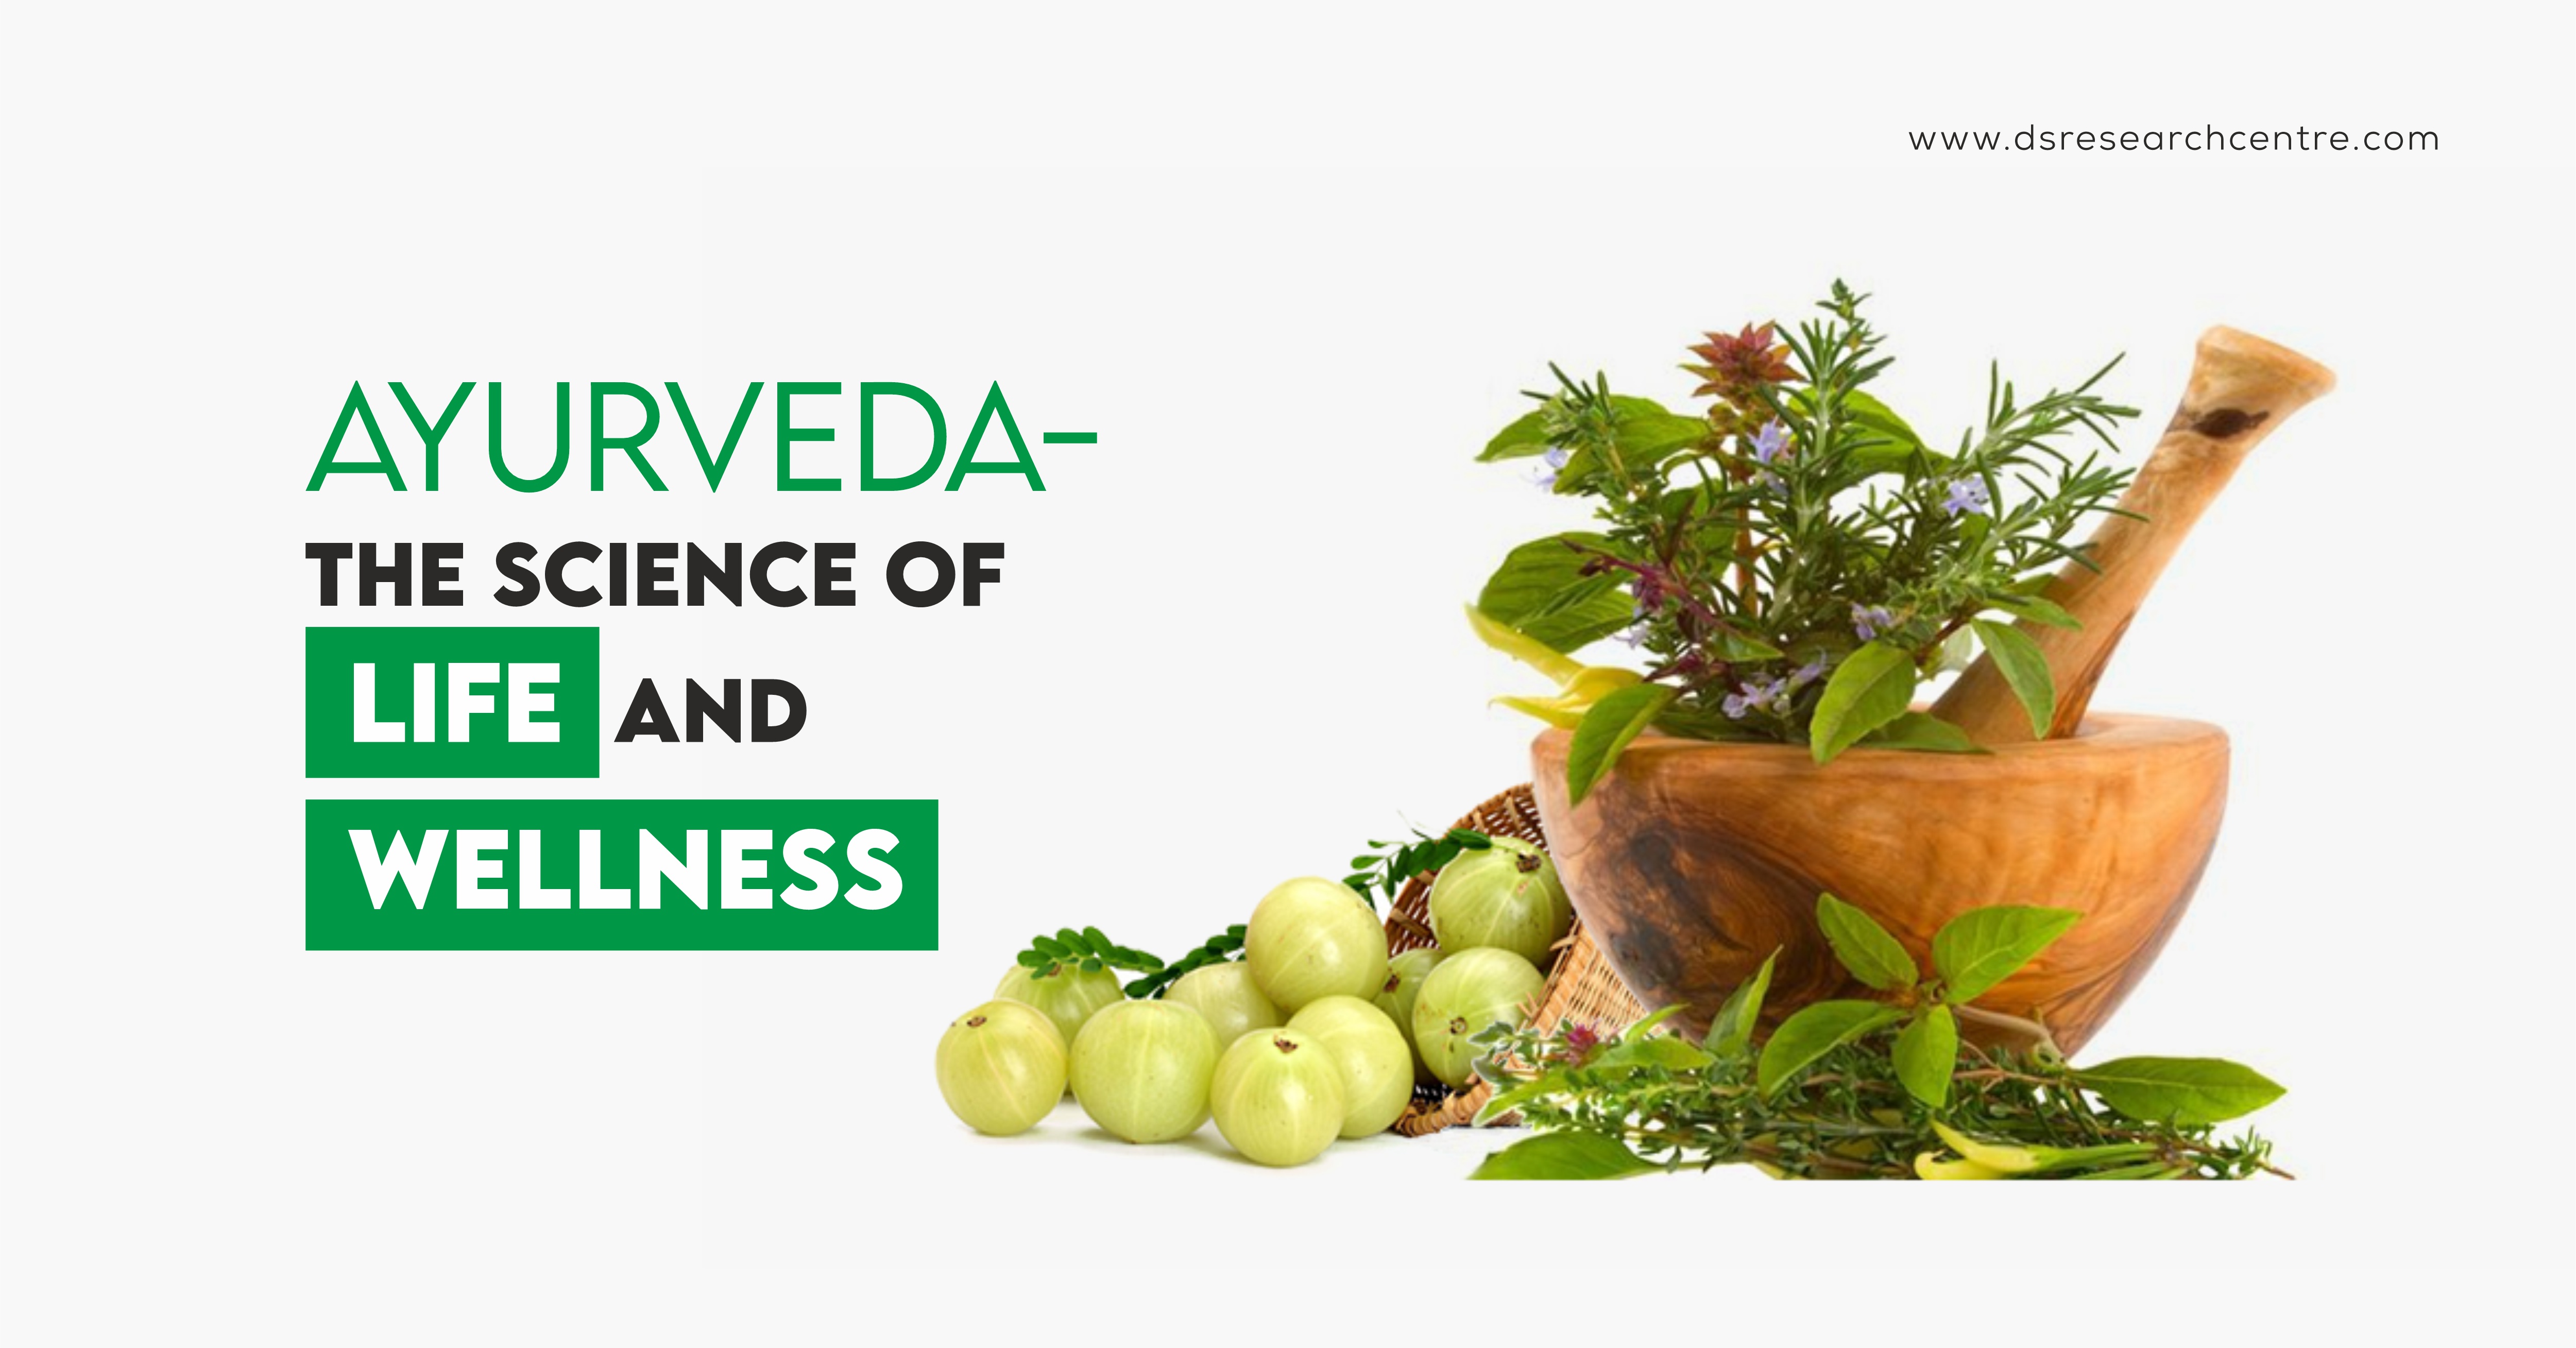 Ayurveda – The Science of Life and Wellness